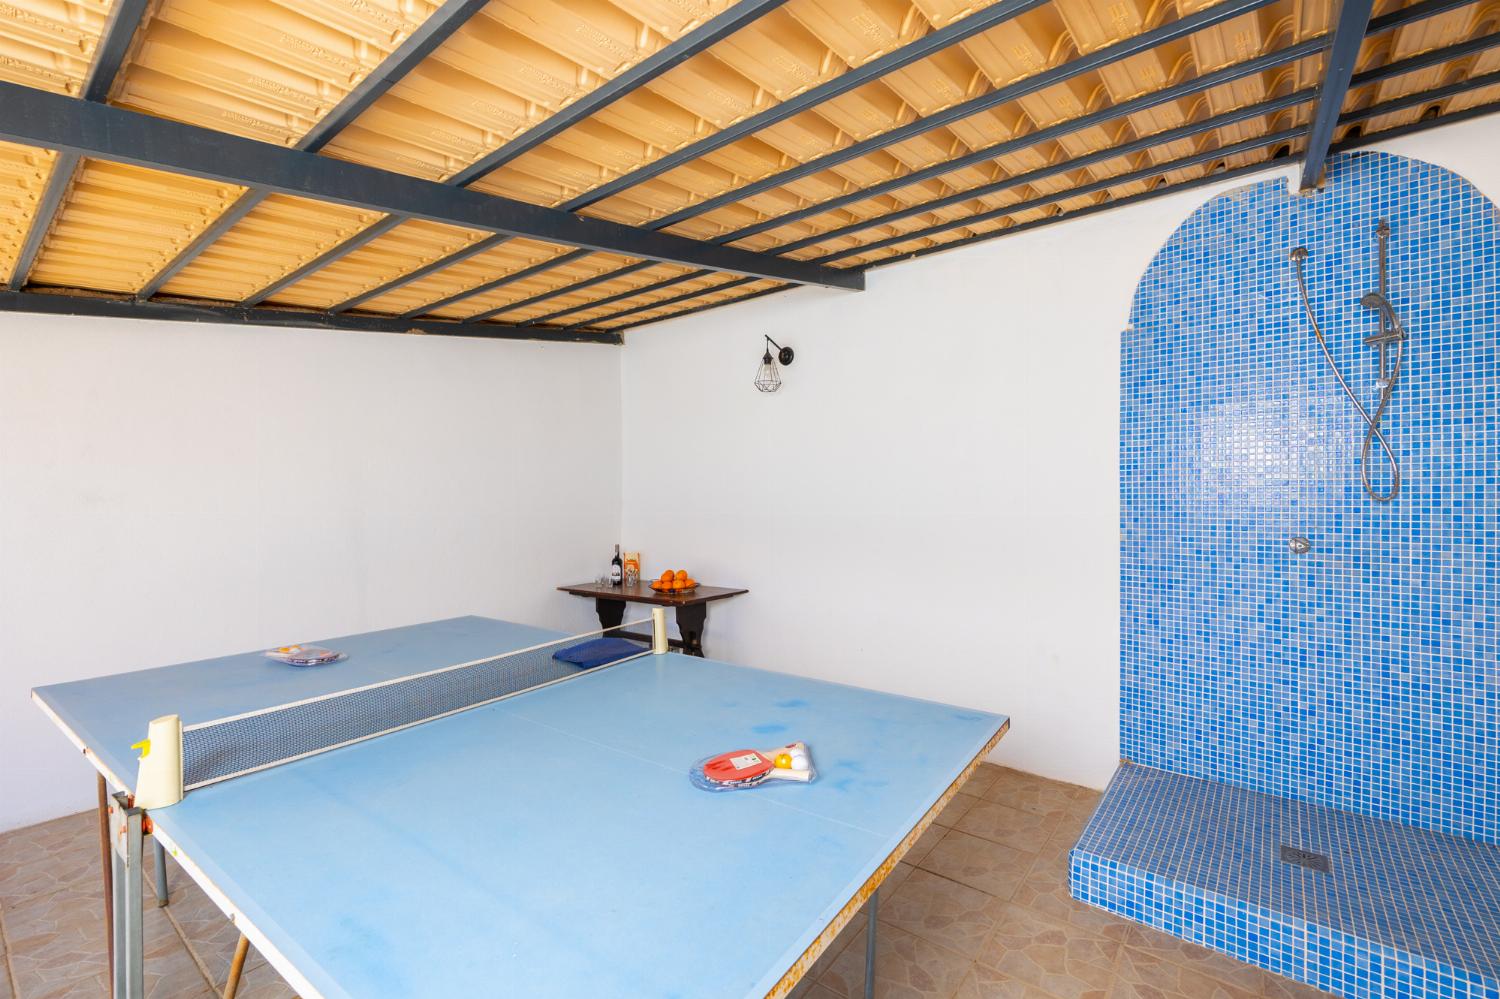 Sheltered terrace with table tennis and outdoor shower